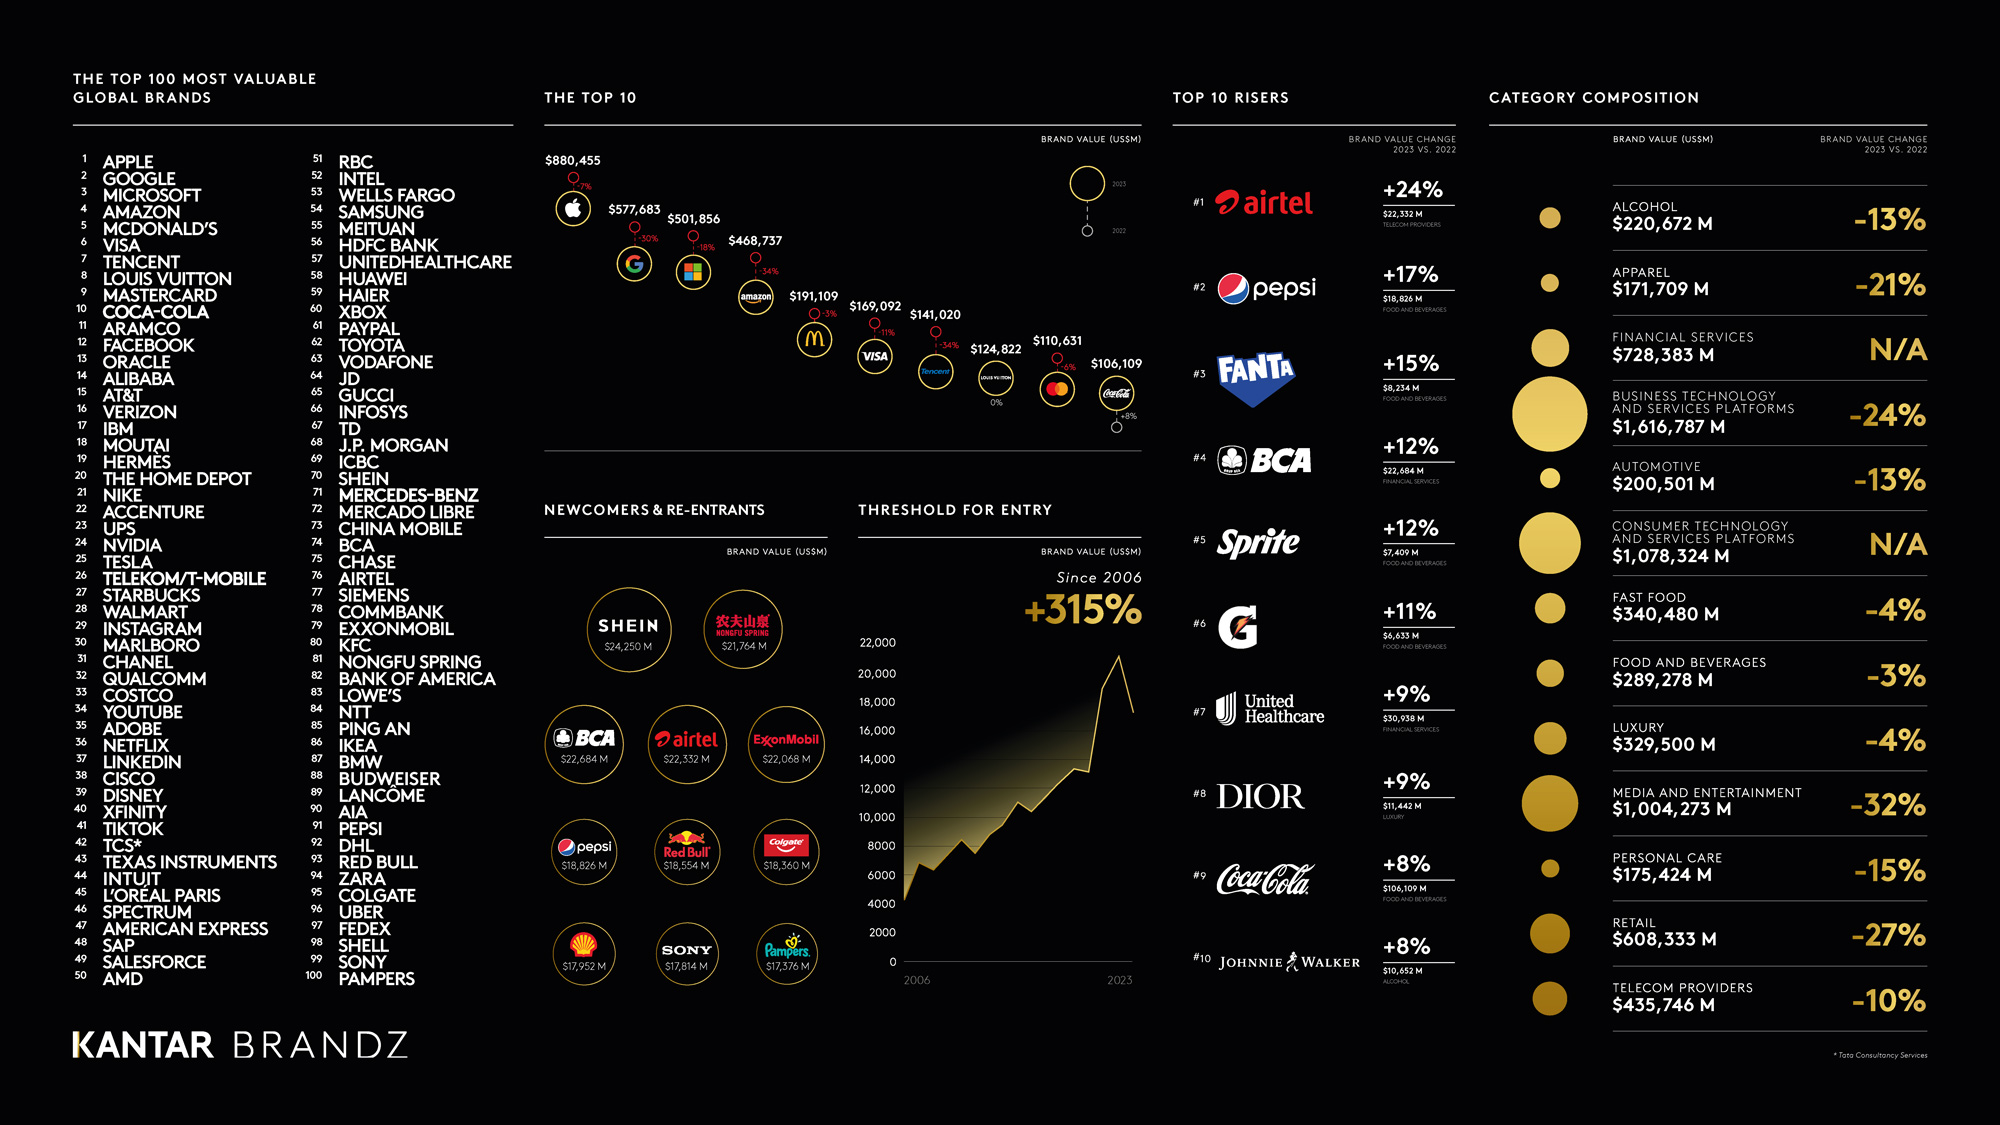 The top 100 most valuable global brands